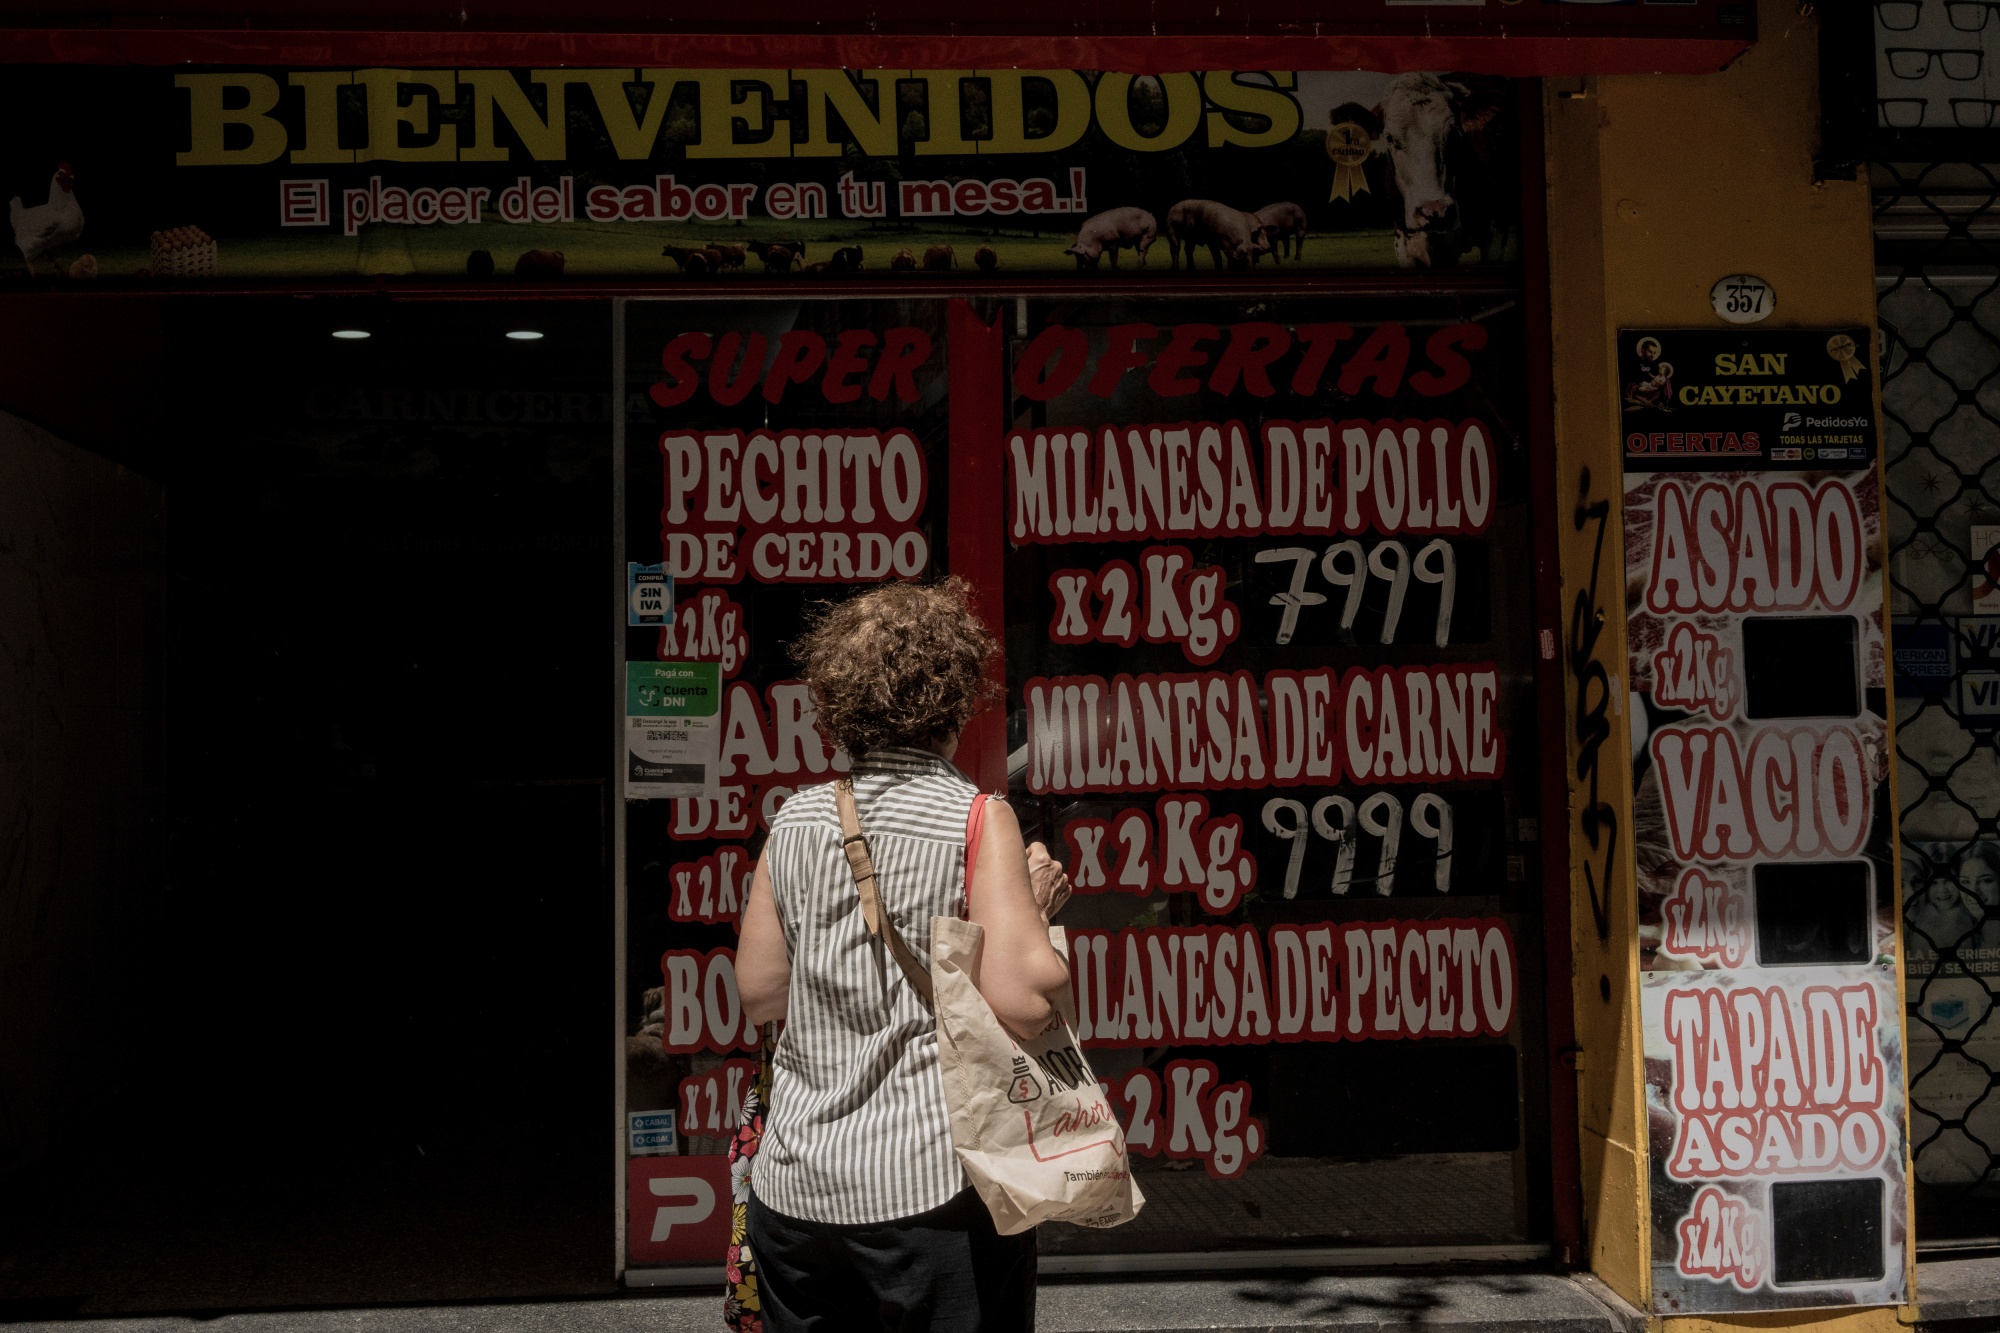 A shopper looks at prices displayed at butcher shop in Buenos Aires, Argentina.